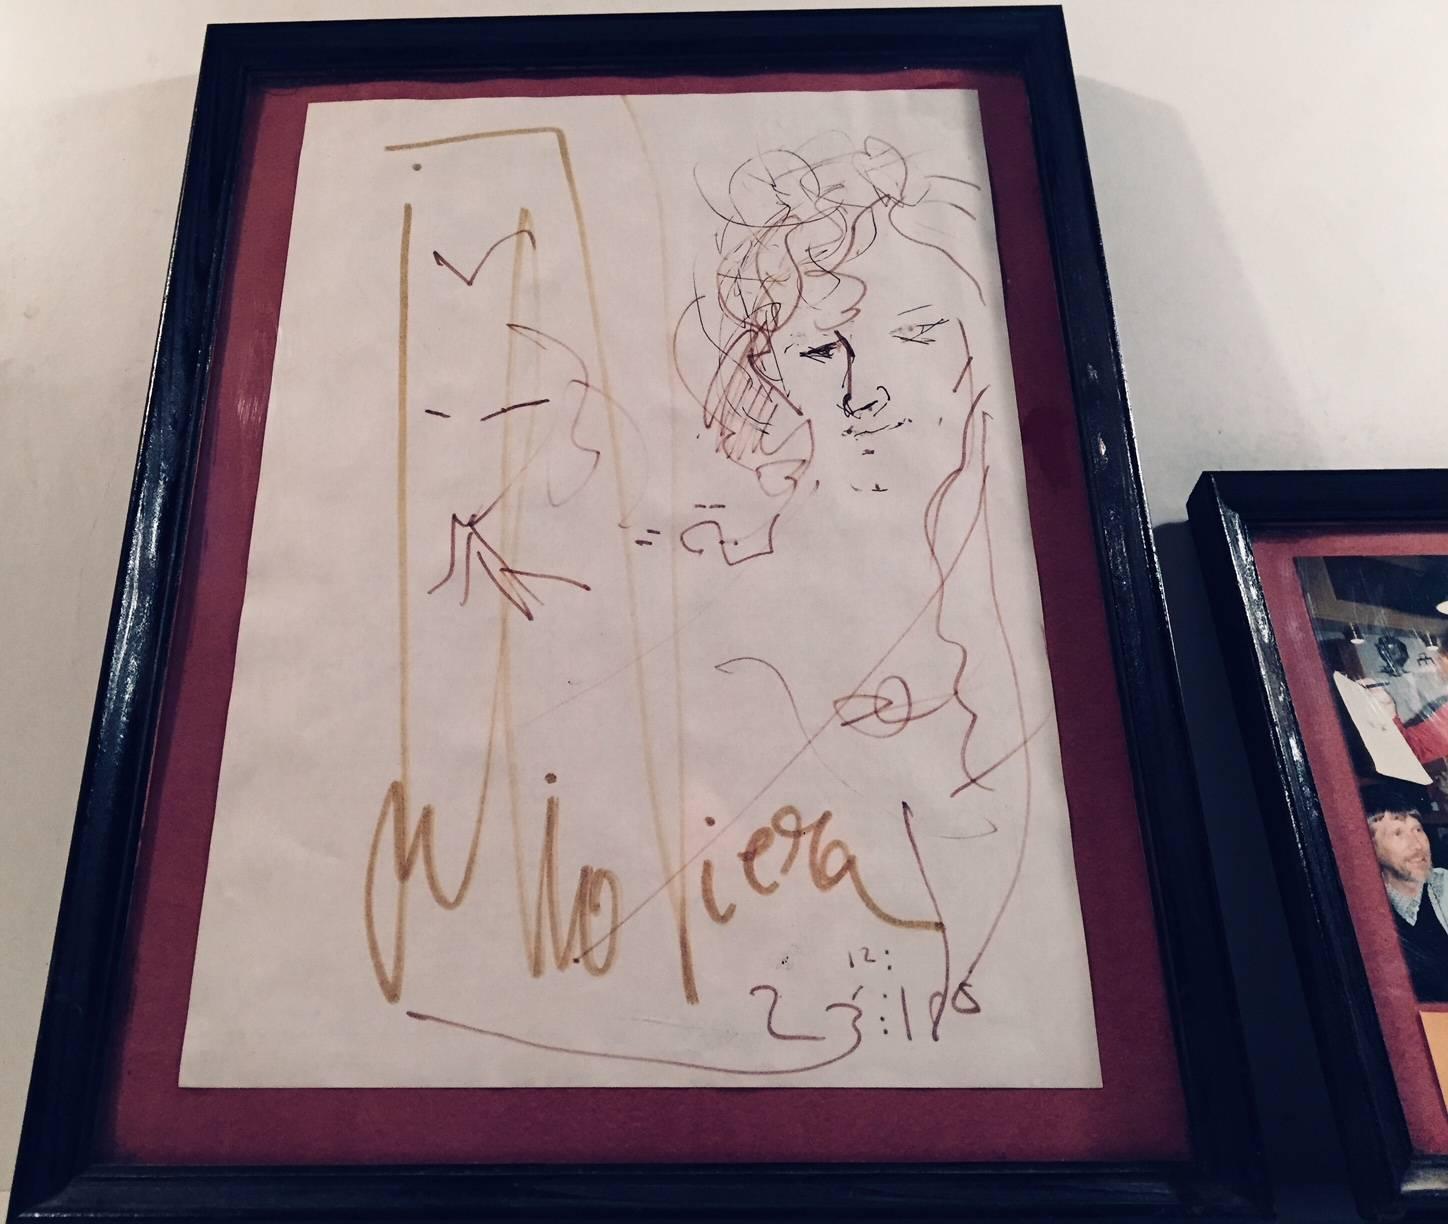 Julio Viera made this drawing depicting a Danish tourist called Ruth. Ruth met and drank with Viera at Pepe's Bar in Mallorca, Spain. The drawing is accompanied by a photograph of Viera holding the drawing. The drawing is dated 23/12 - 1987 and the